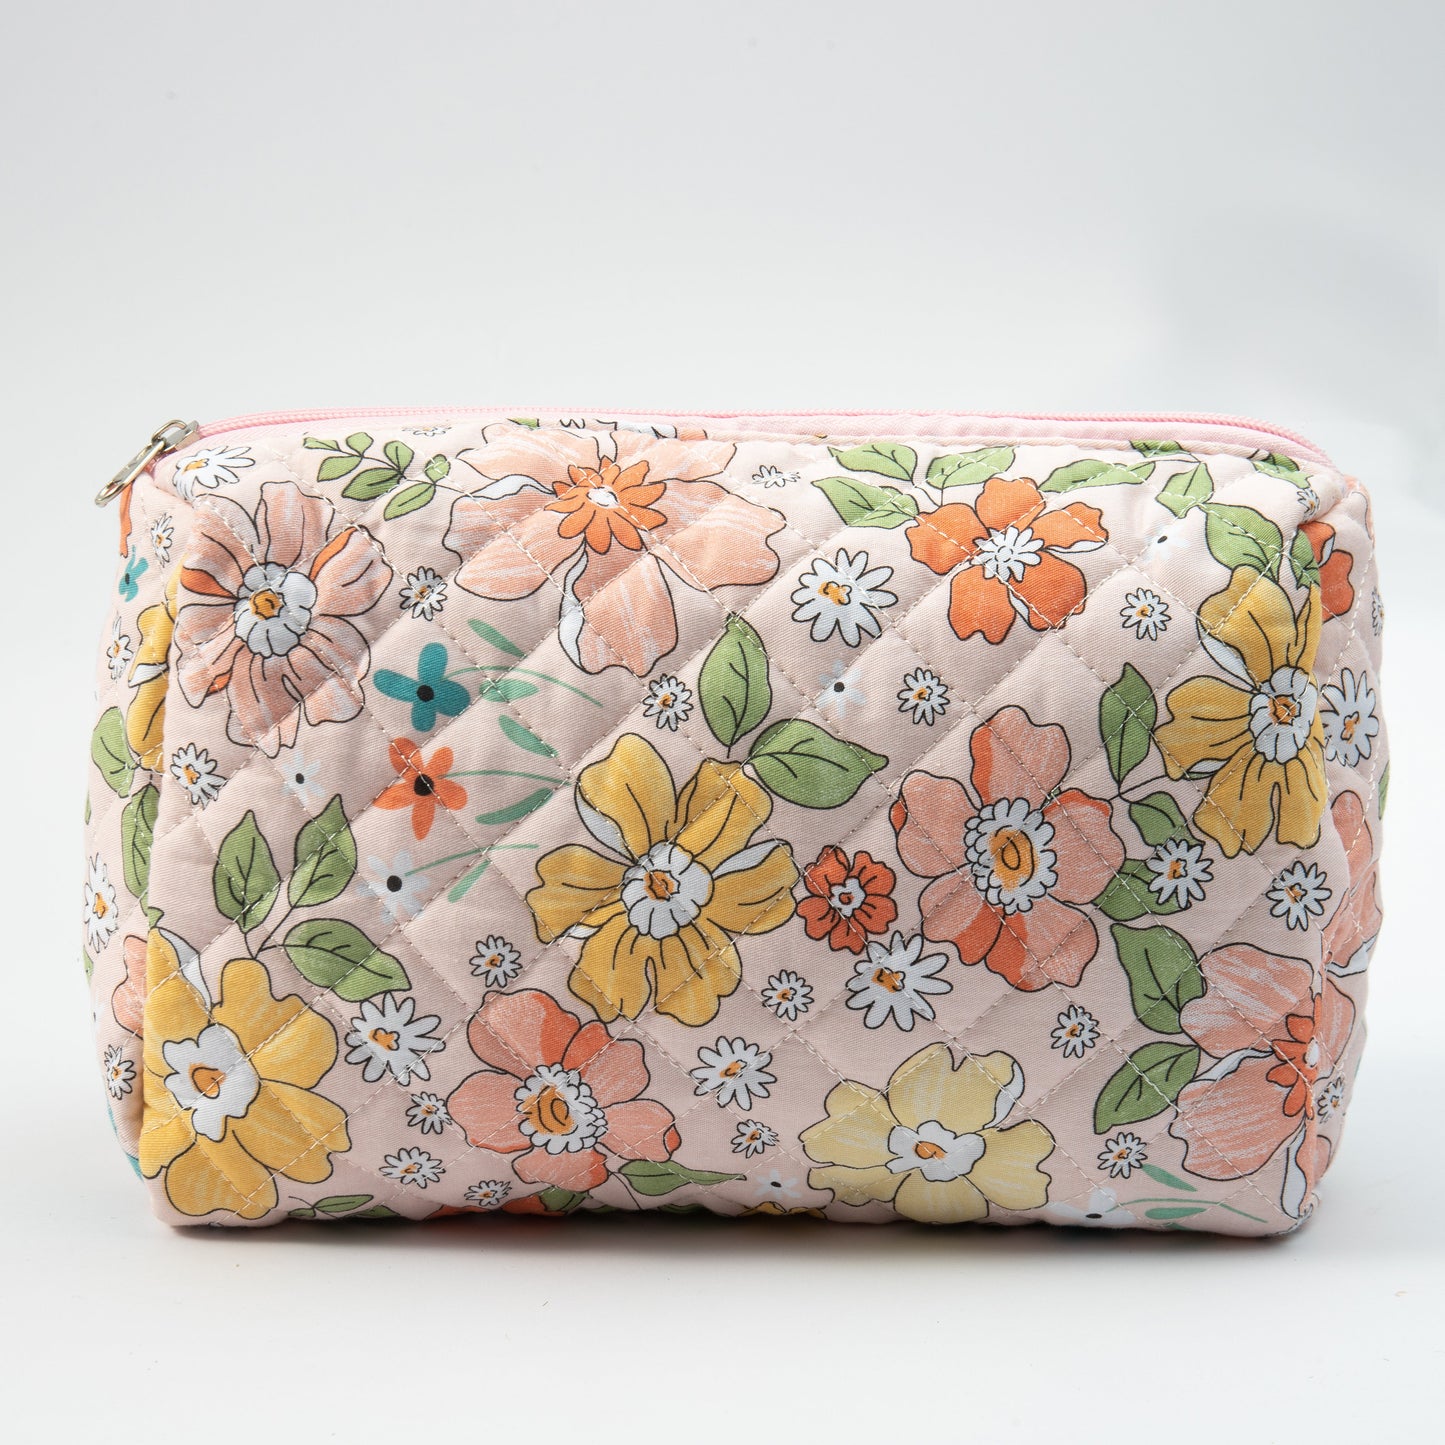 Small Cosmetic Bag With Floral Quilted Makeup Pouch - Travel Toiletry Organizer